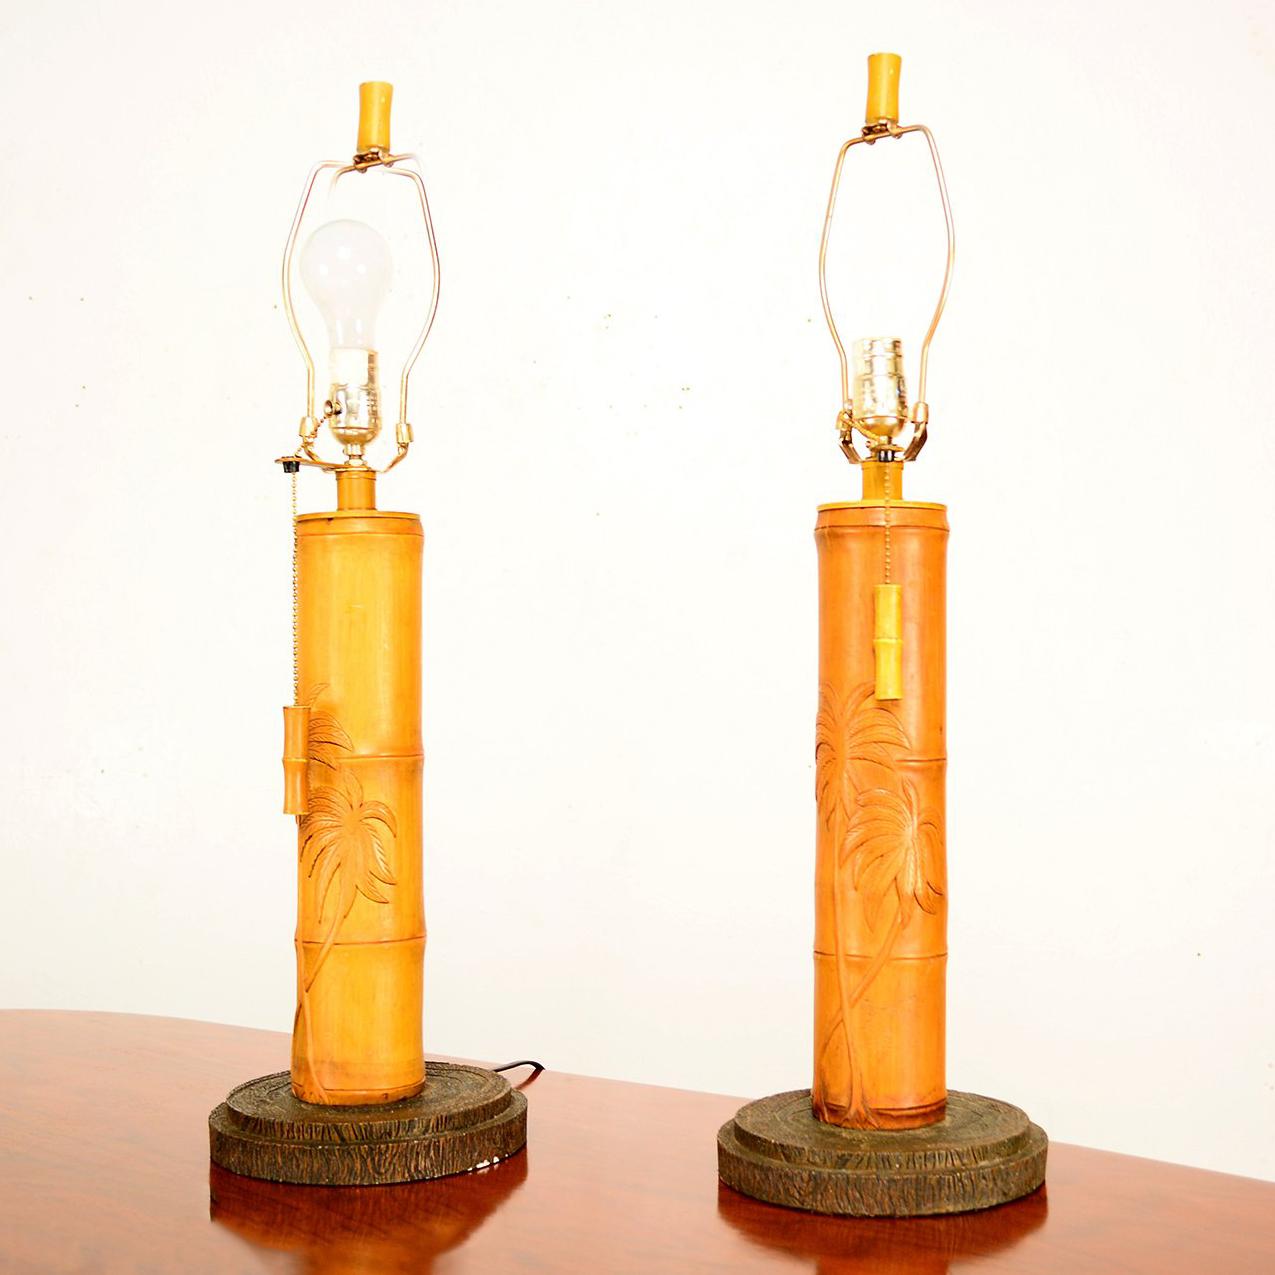 For your consideration a pair of bamboo table lamps.

Unmarked no information on the maker, 

Pull down chain and finial have the bamboo details.
The body is made of wood with a carved palm tree and the shape of the bamboo, mounted in a ceramic